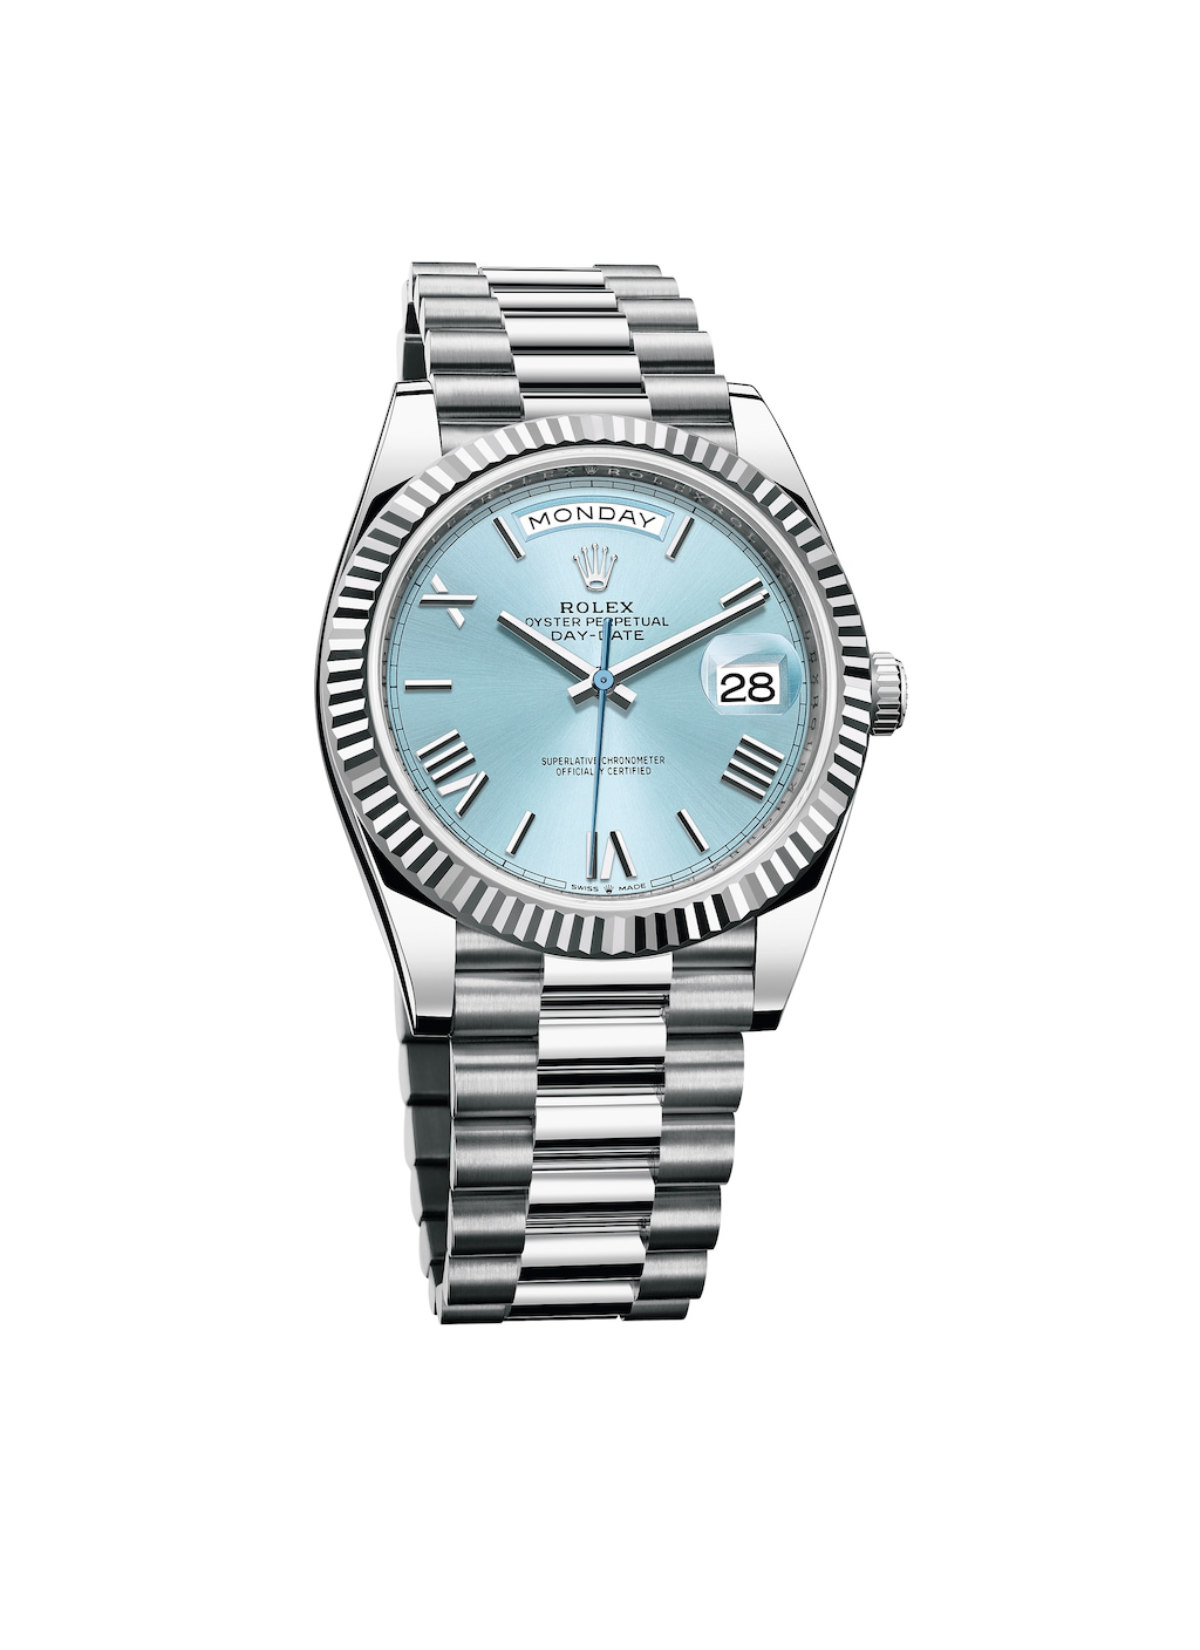 Rolex Launches Its New Oyster Perpetual Day-Date 40 Watch